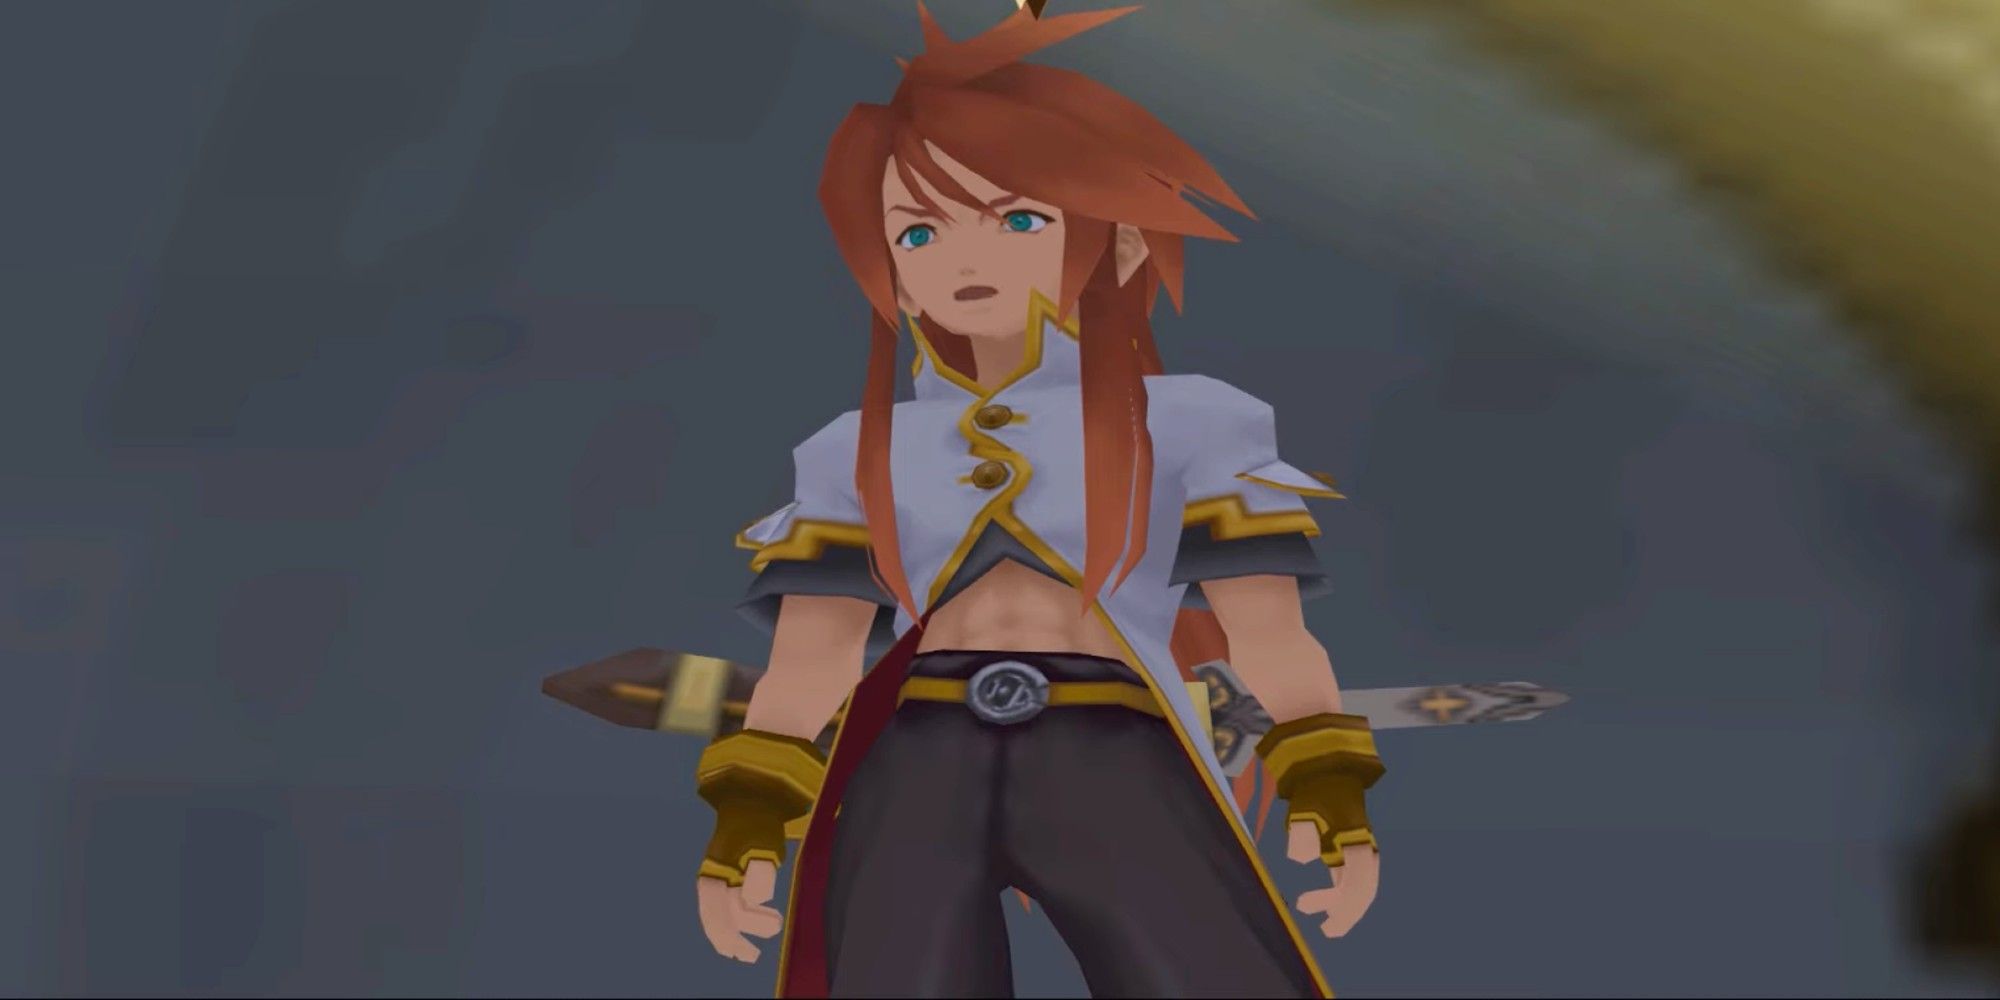 Luke from tales of the abyss looking confused